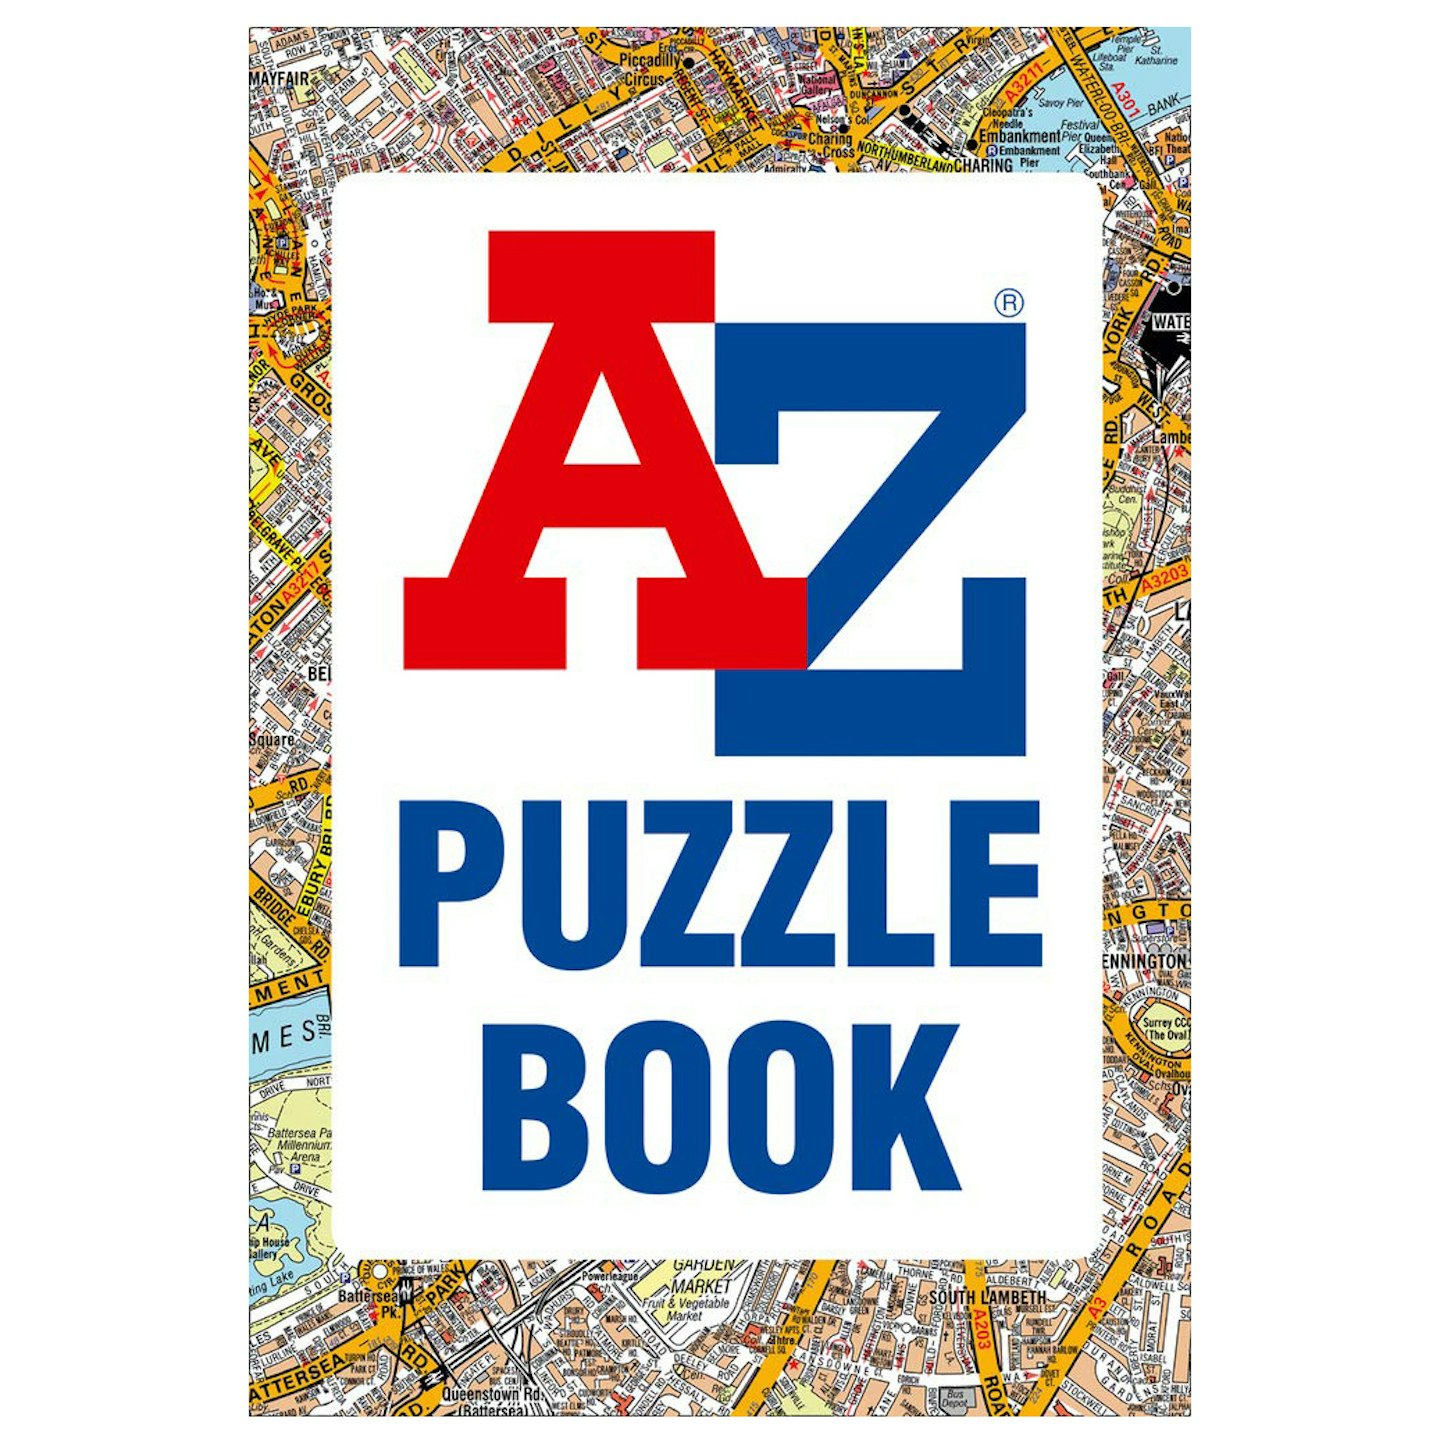 A-Z Puzzle Book u2013 Have you got the Knowledge?